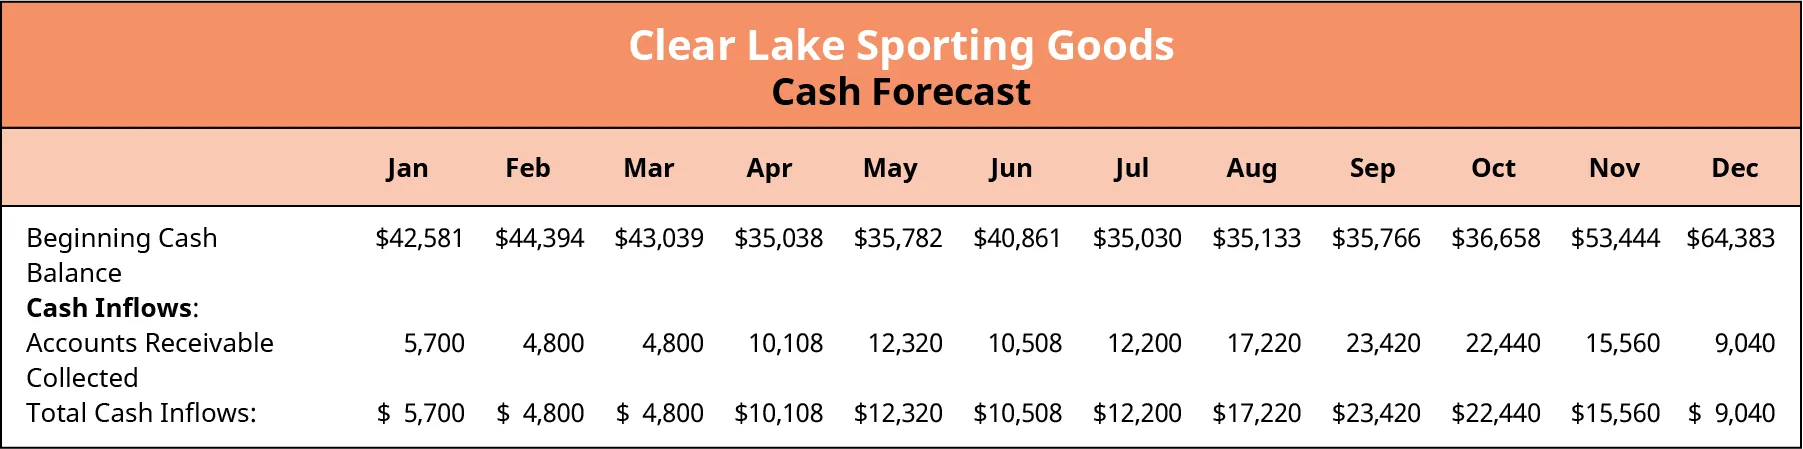 The cash forecast by month for Clear Lake Sporting Goods shows beginning cash balance, cash inflows, accounts receivables collected, and total cash inflows from January to December.